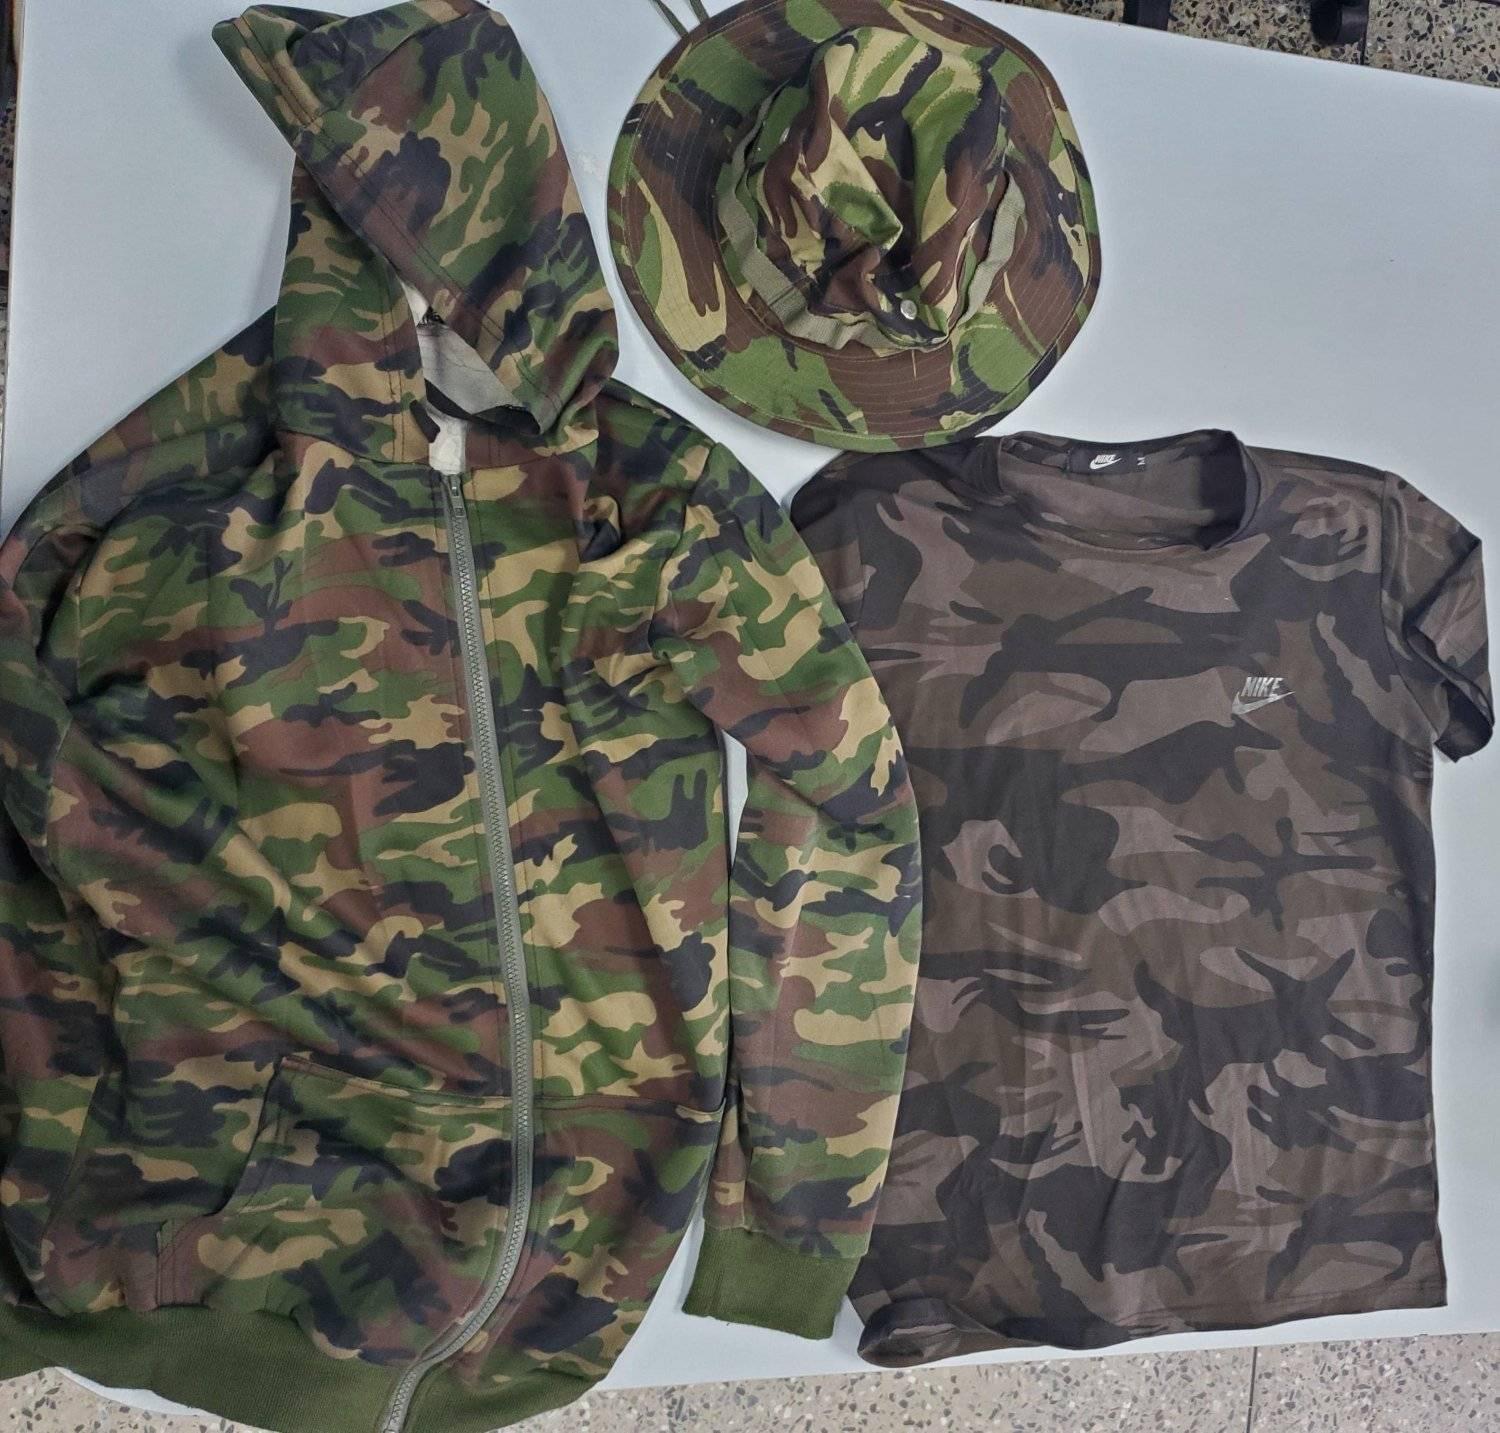 26-year-old held with camouflage clothing during police operation